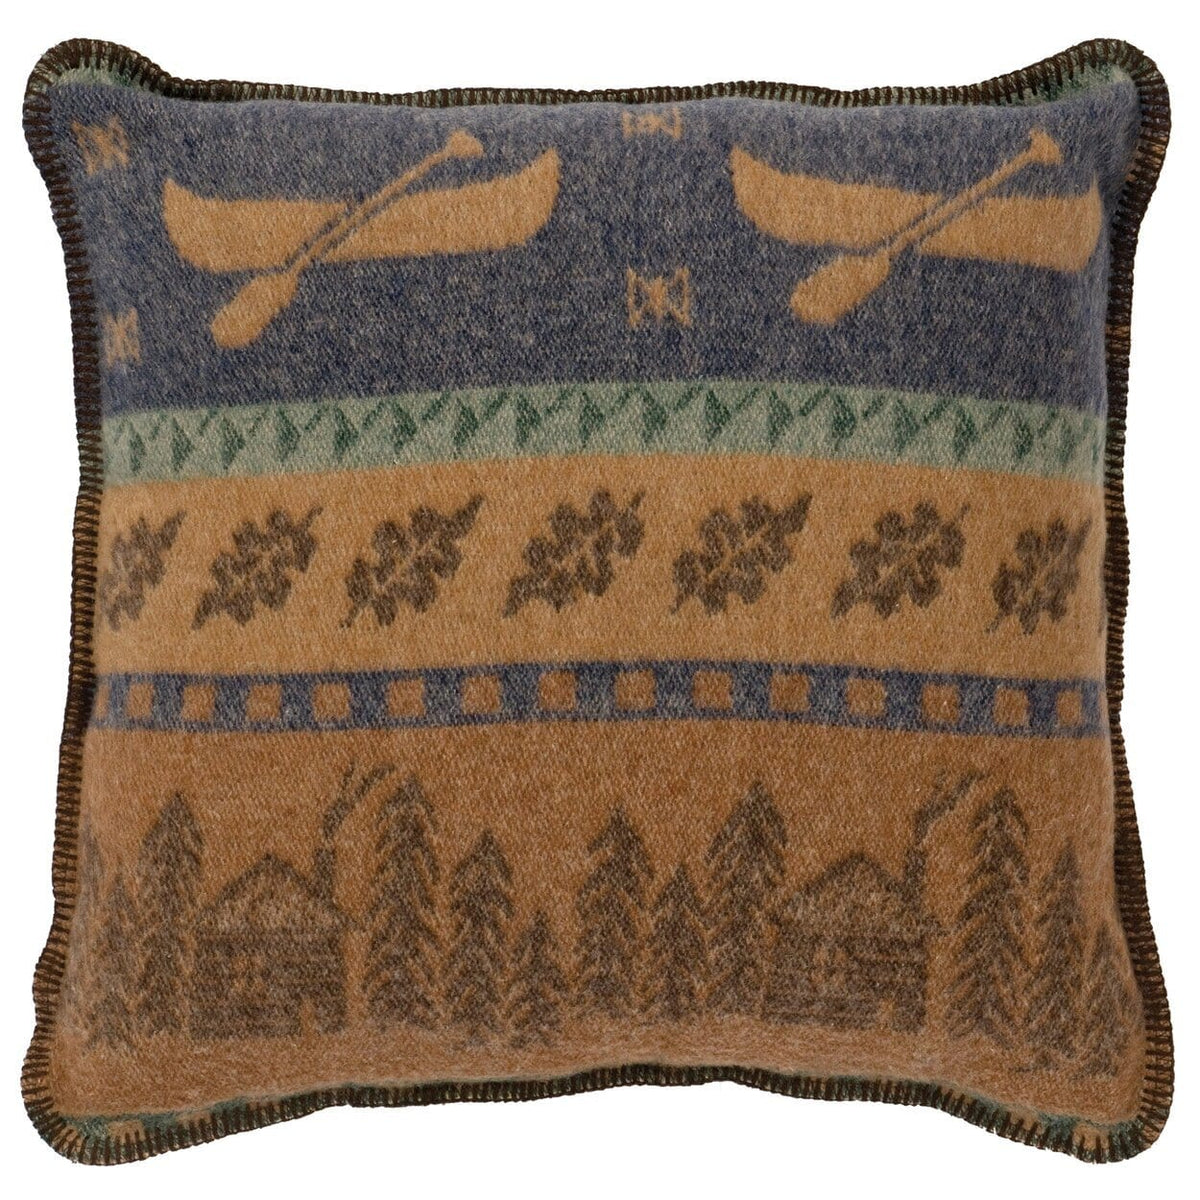 Wooded River Lakeshore II Wool Pillow & Matching Throw